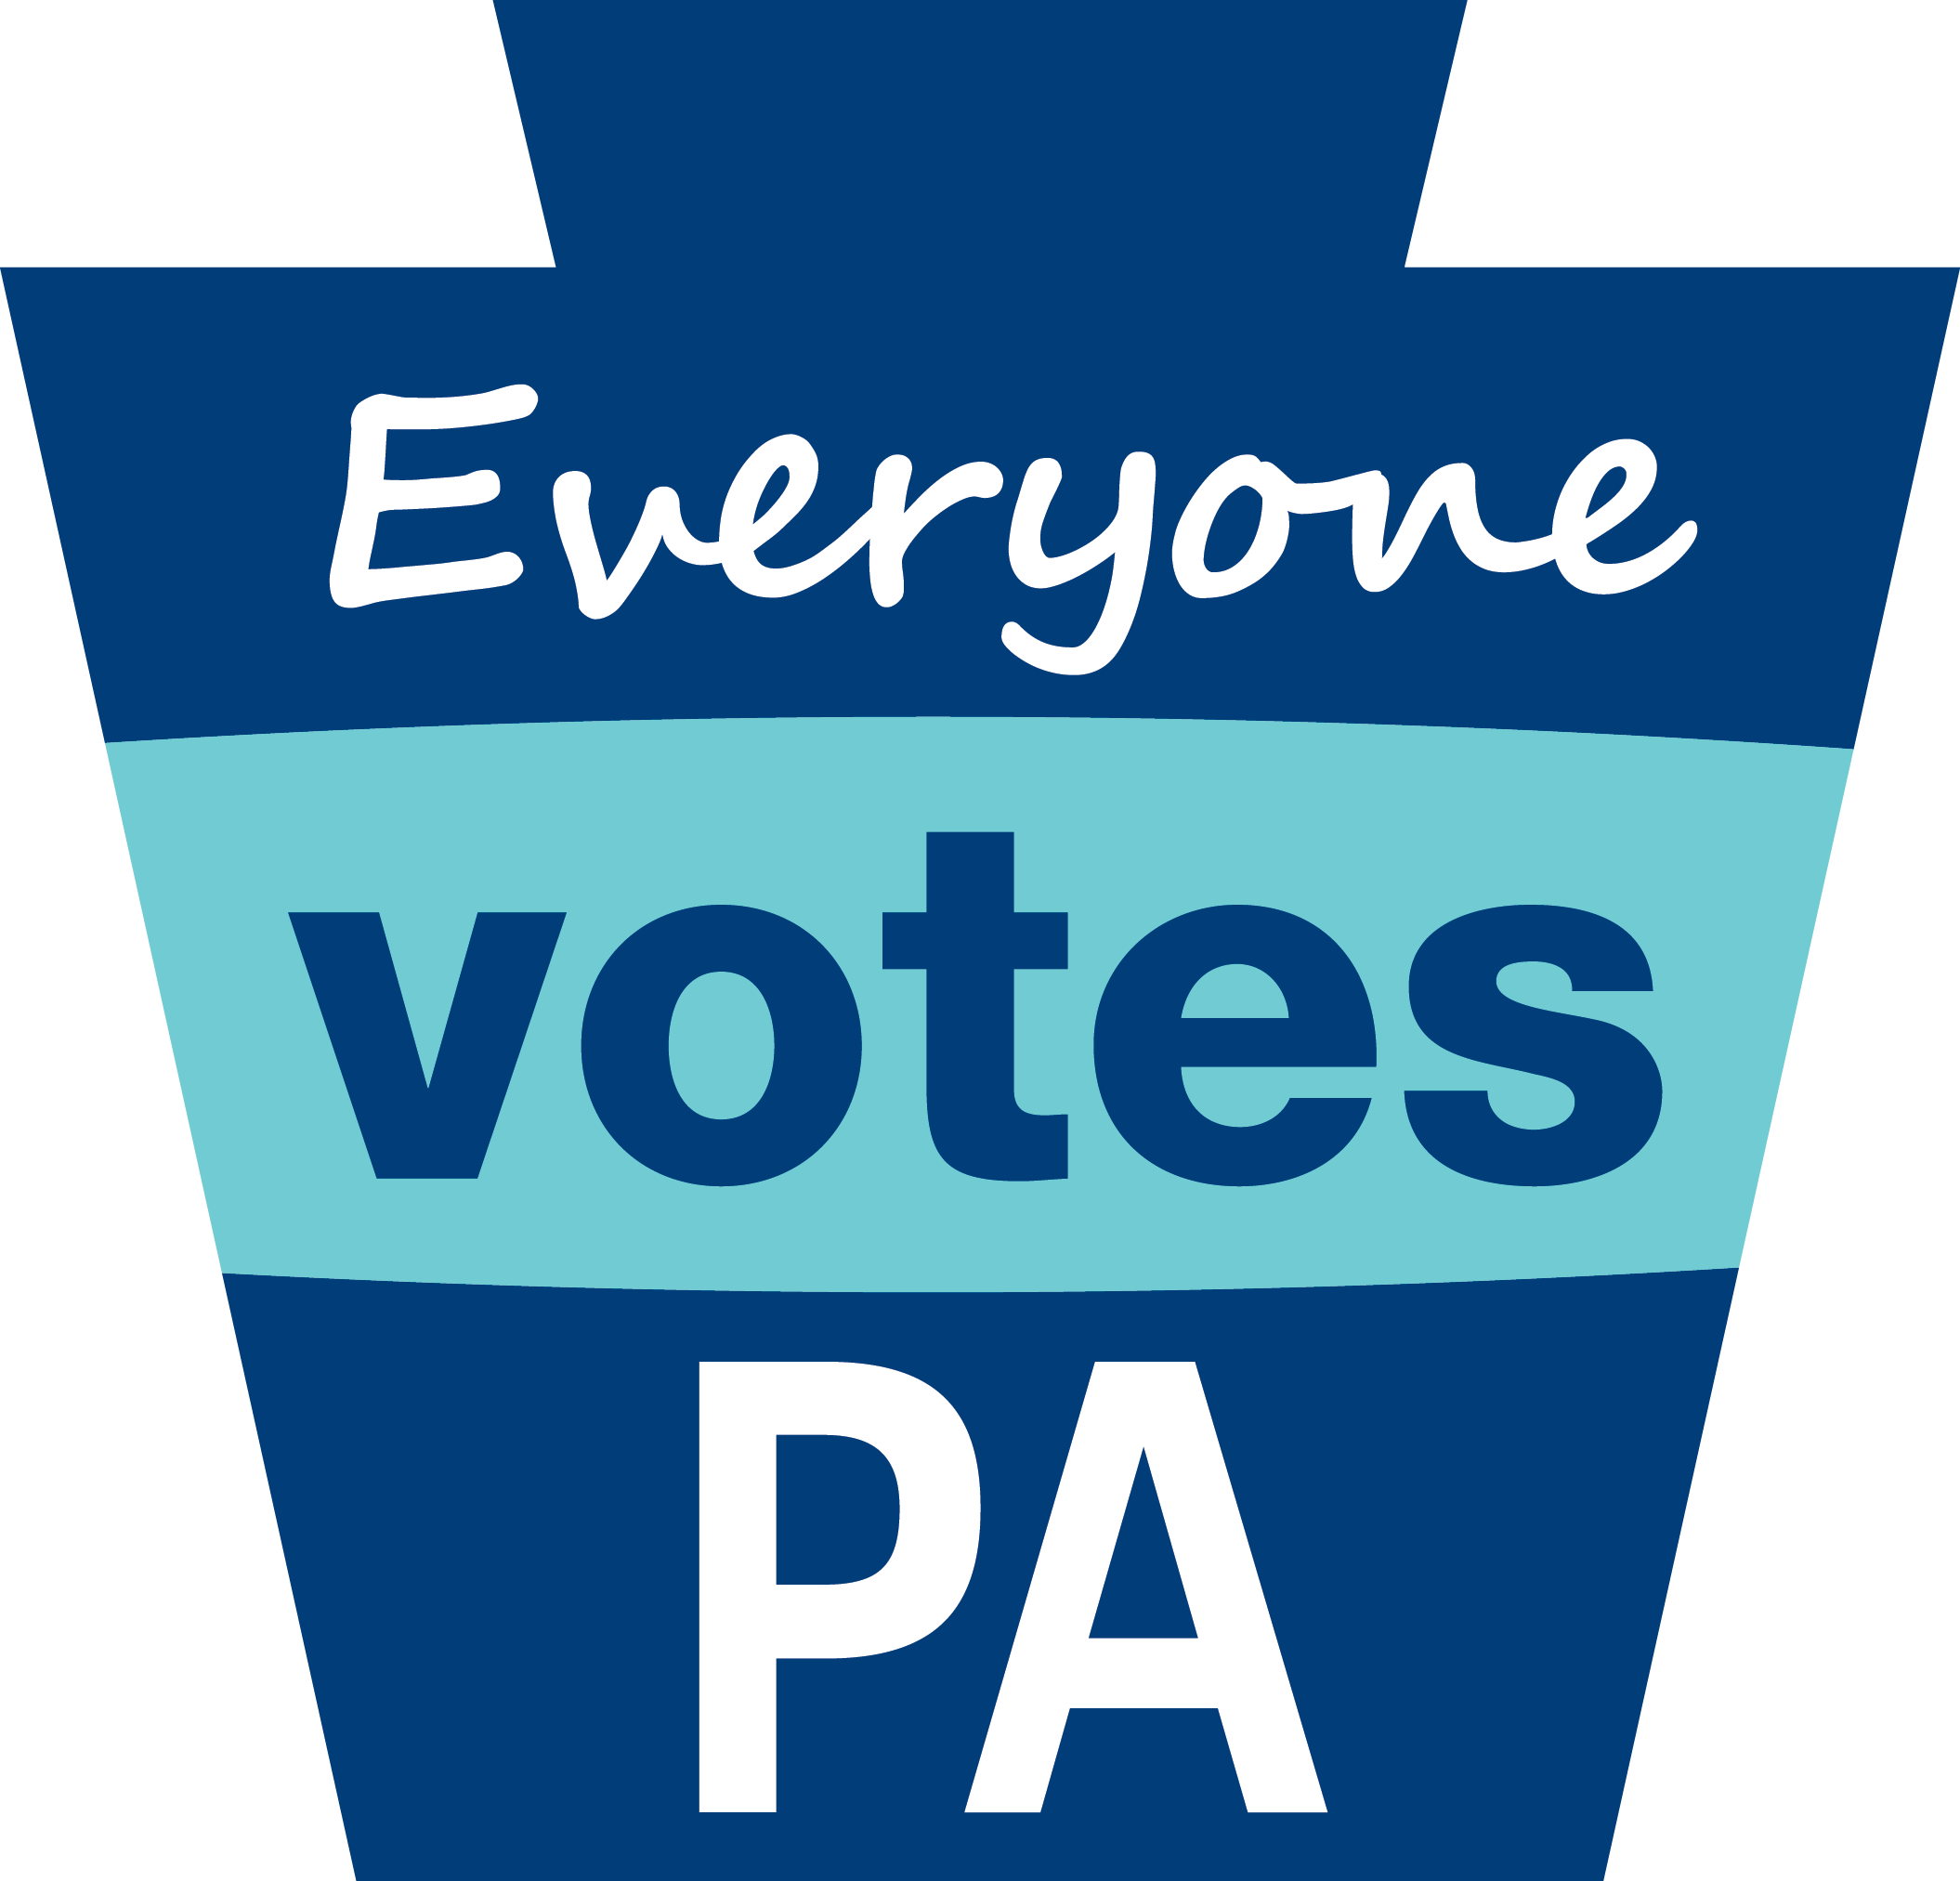 What are the polling hours in Pennsylvania?